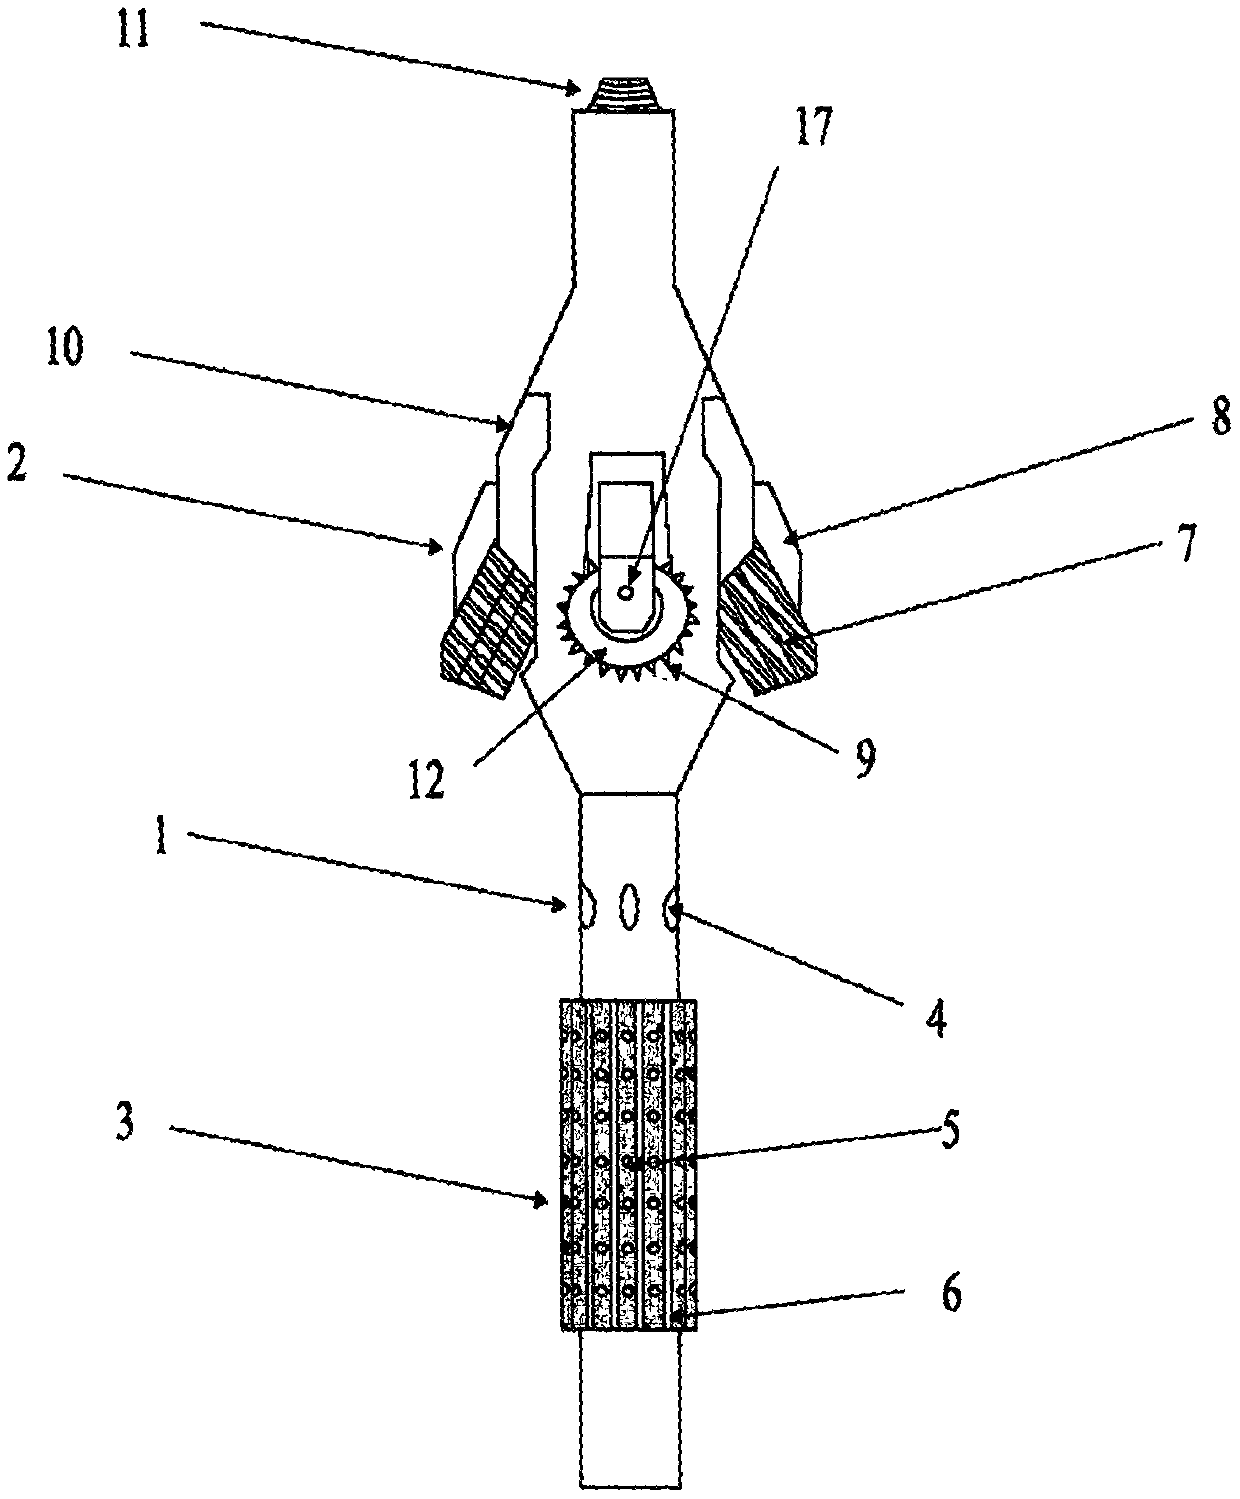 Stepped composite reaming and rock waste removal tool